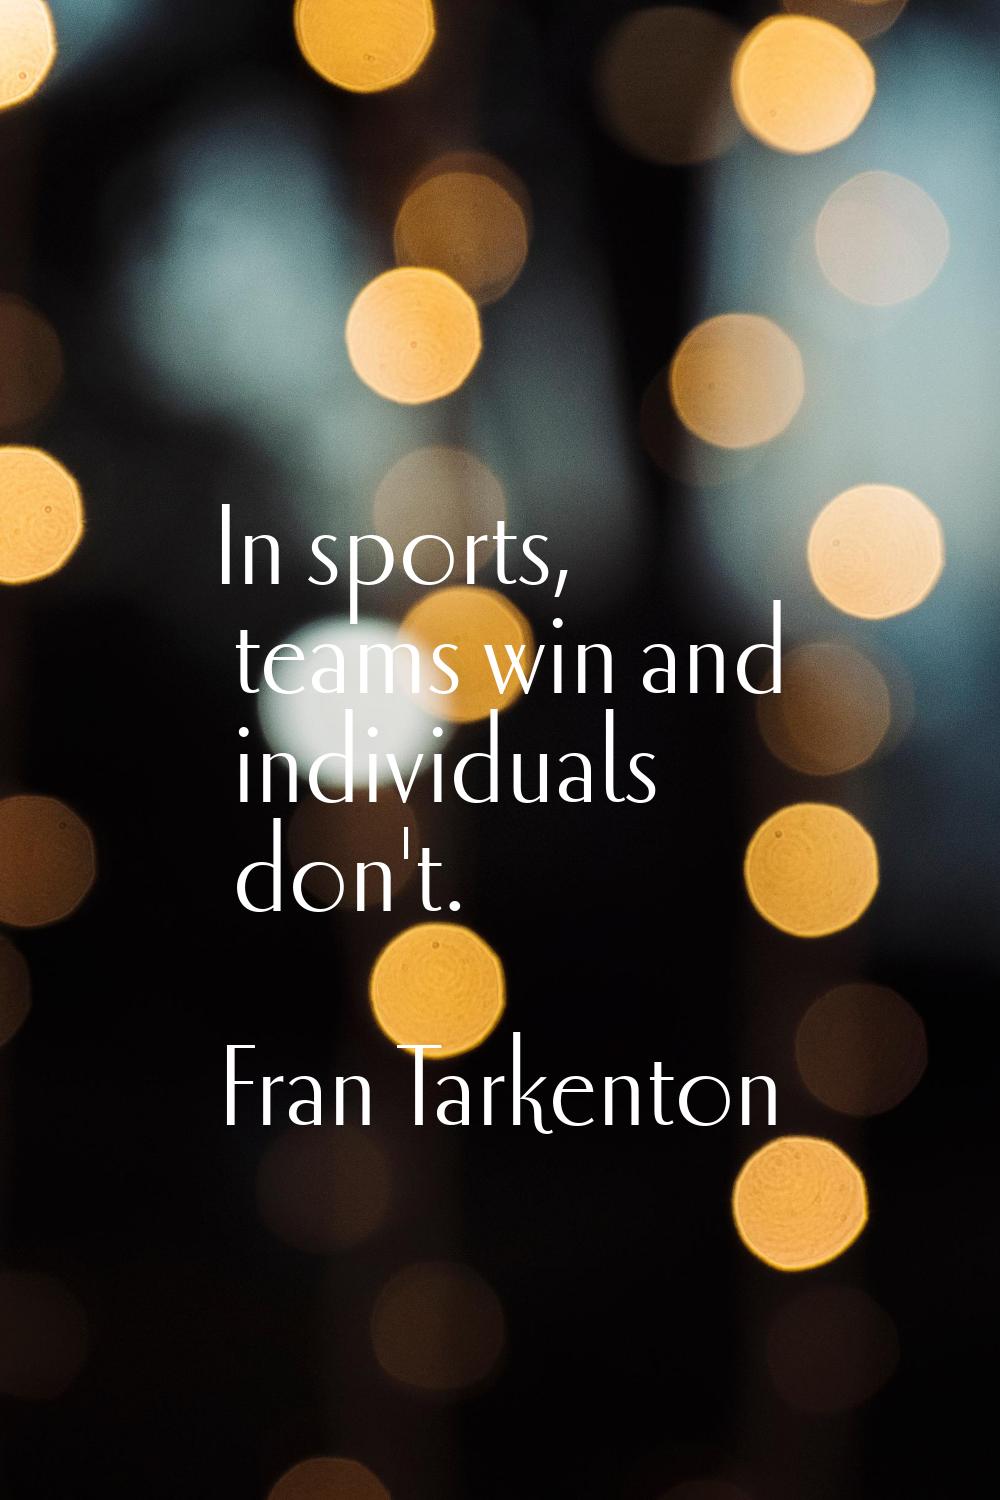 In sports, teams win and individuals don't.